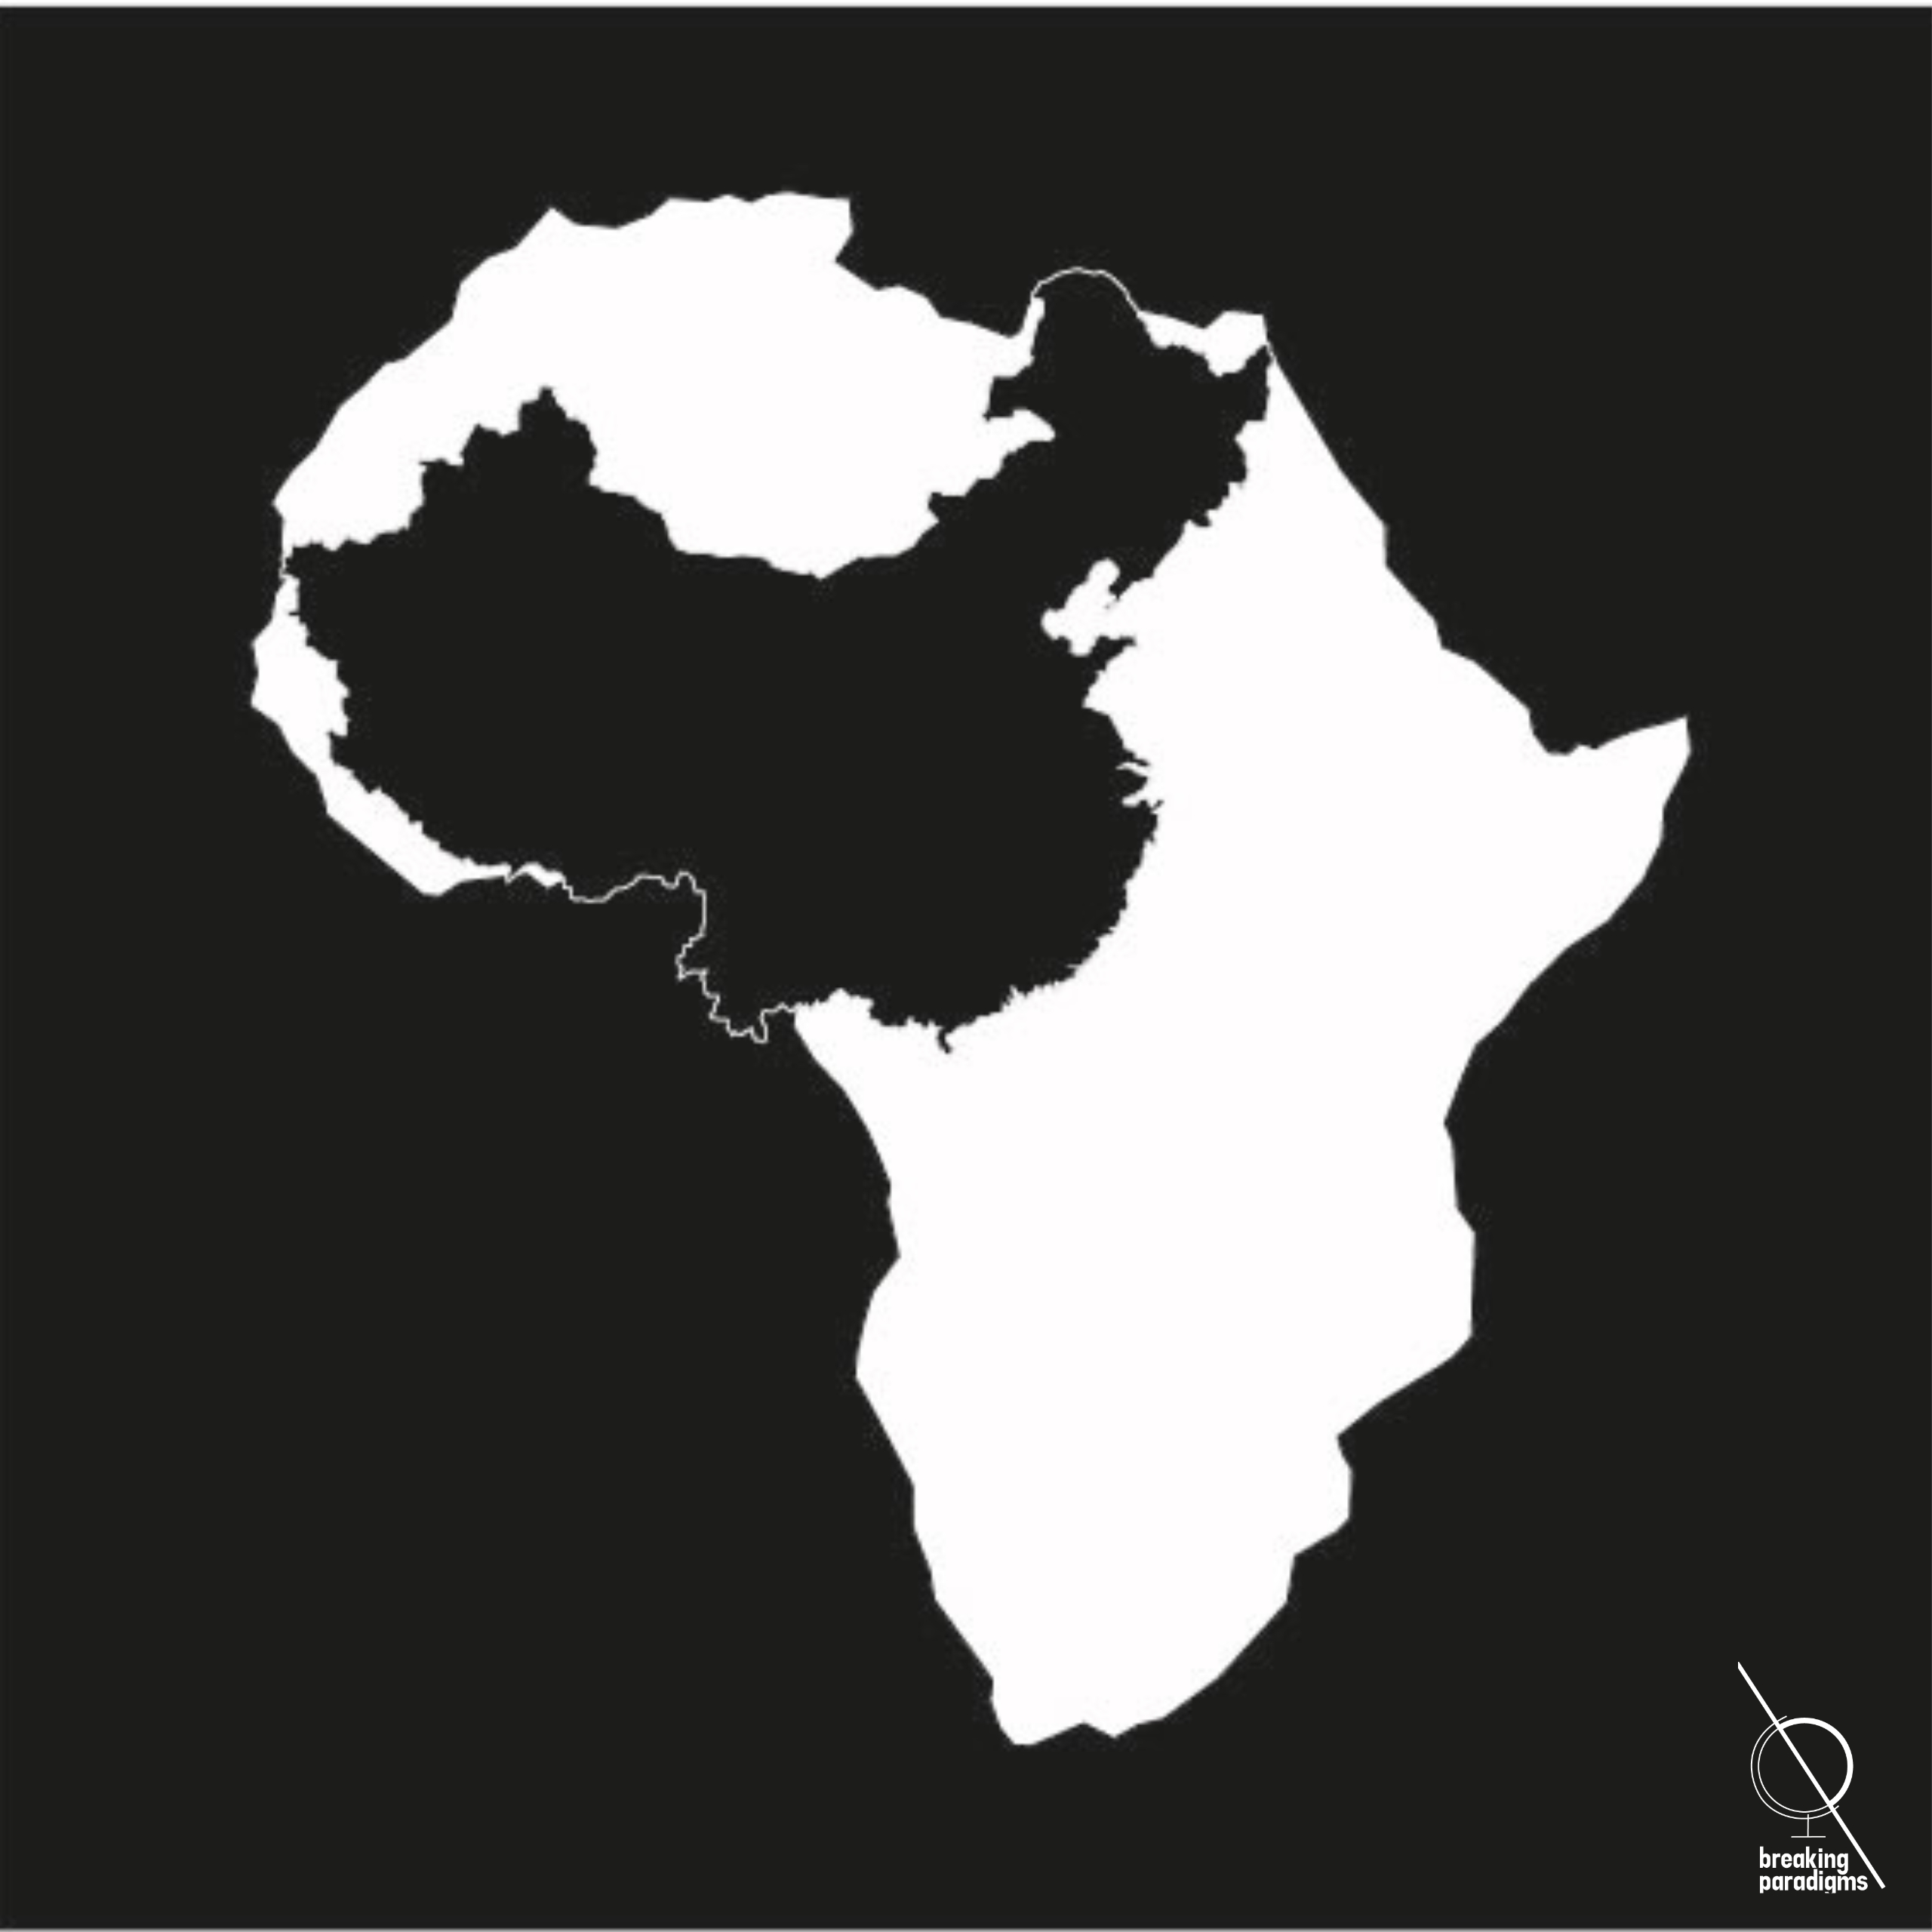 A white map of Africa on a black surface with a map of China within the African boarderlines in black